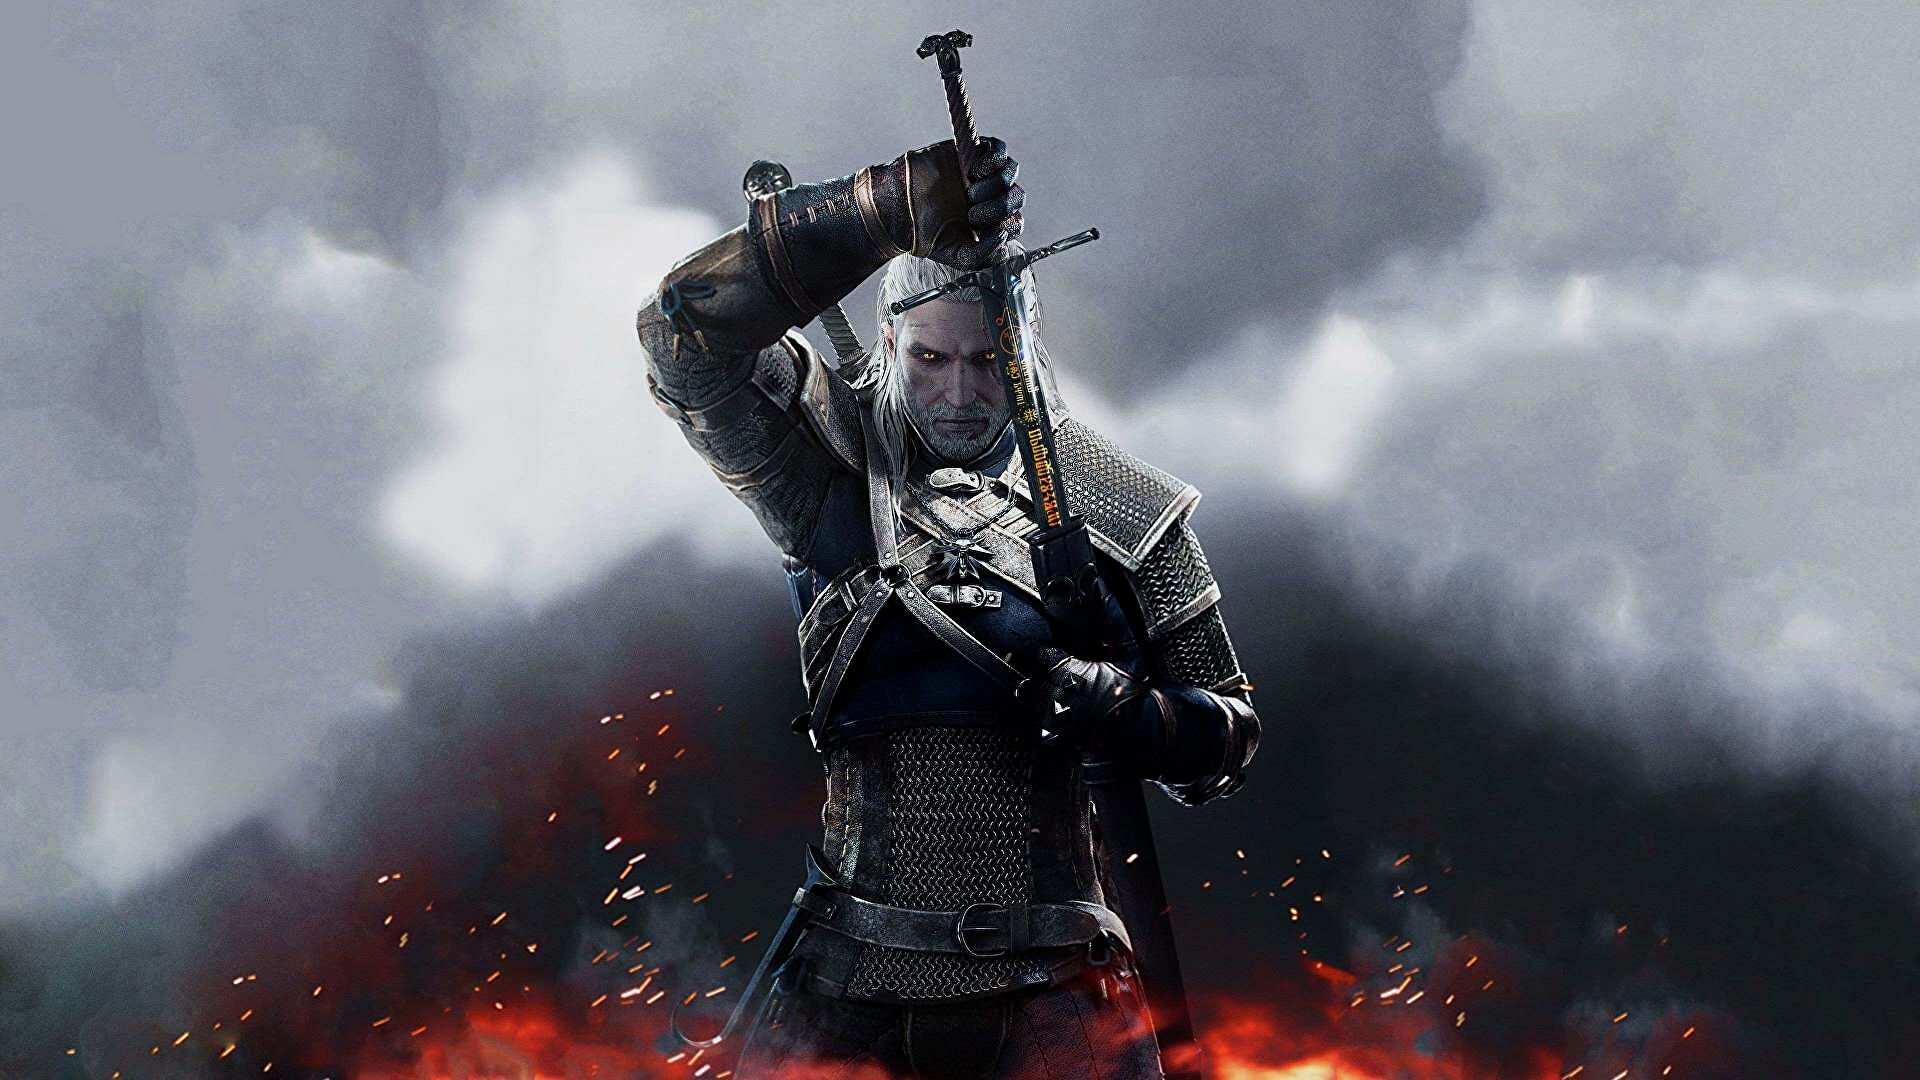 The Witcher 3 next-gen patch for PC in “final stages,” console version coming to retail